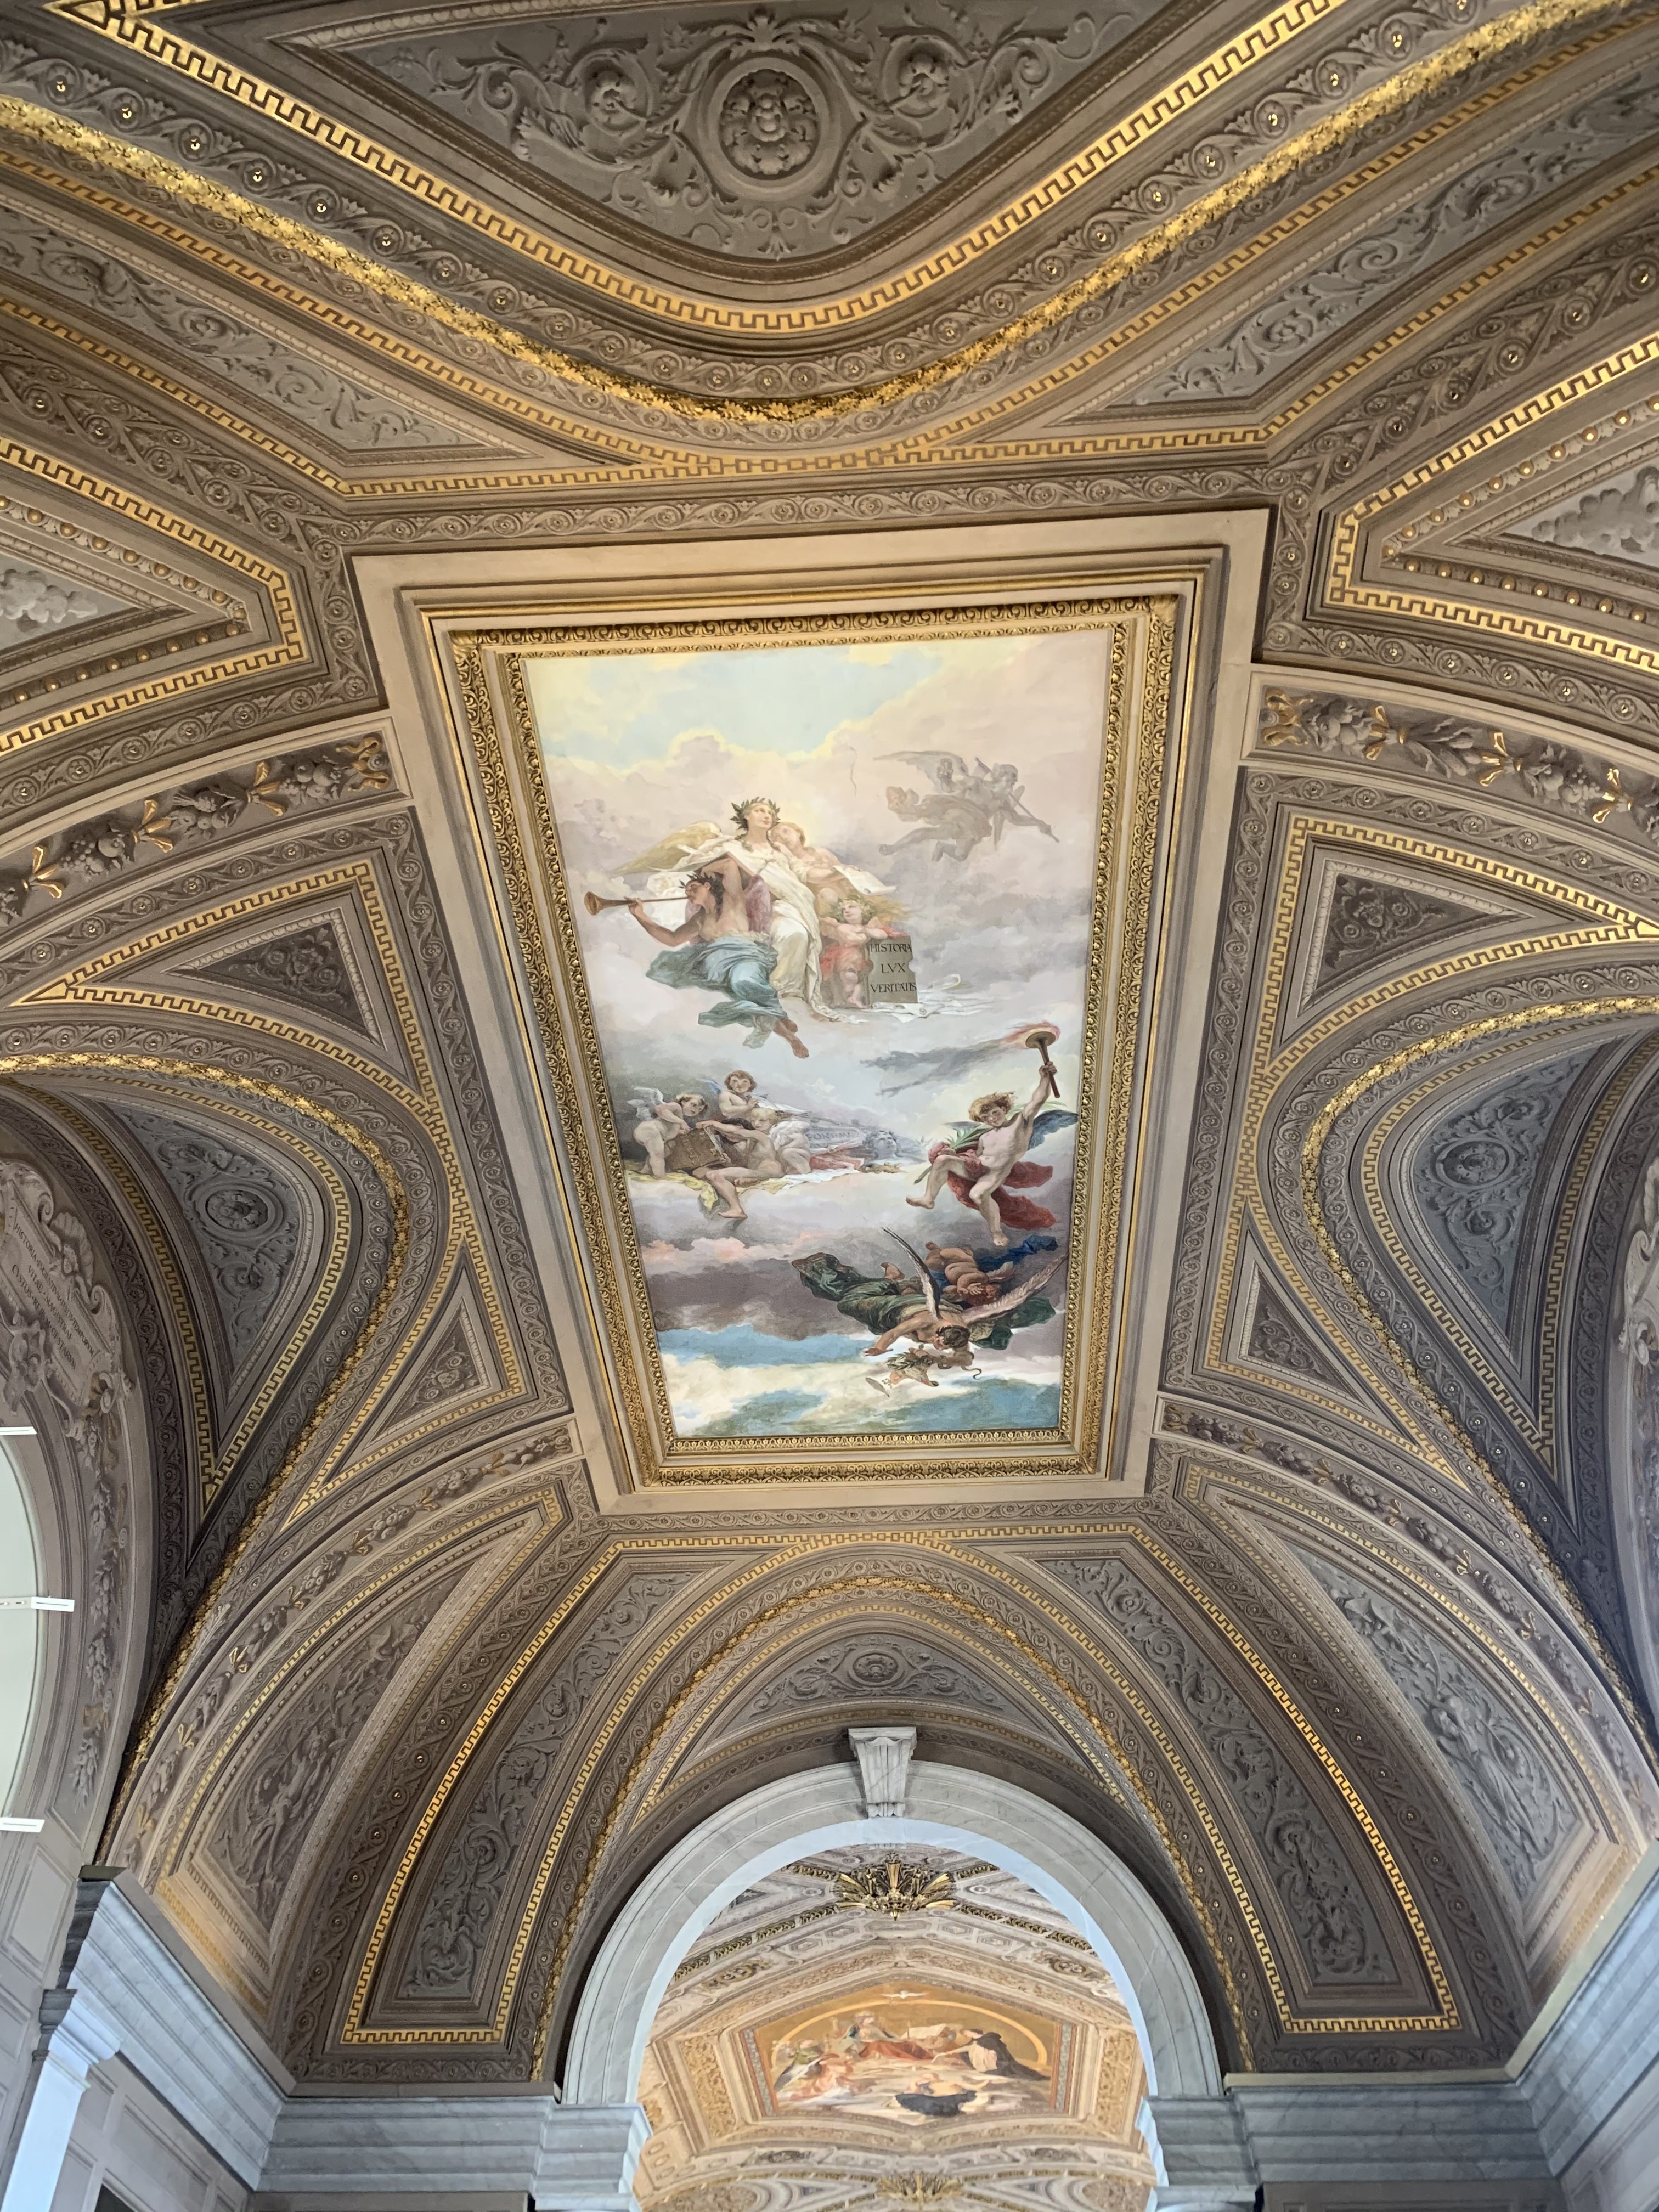 Ceiling art in the Vatican depicting angels.